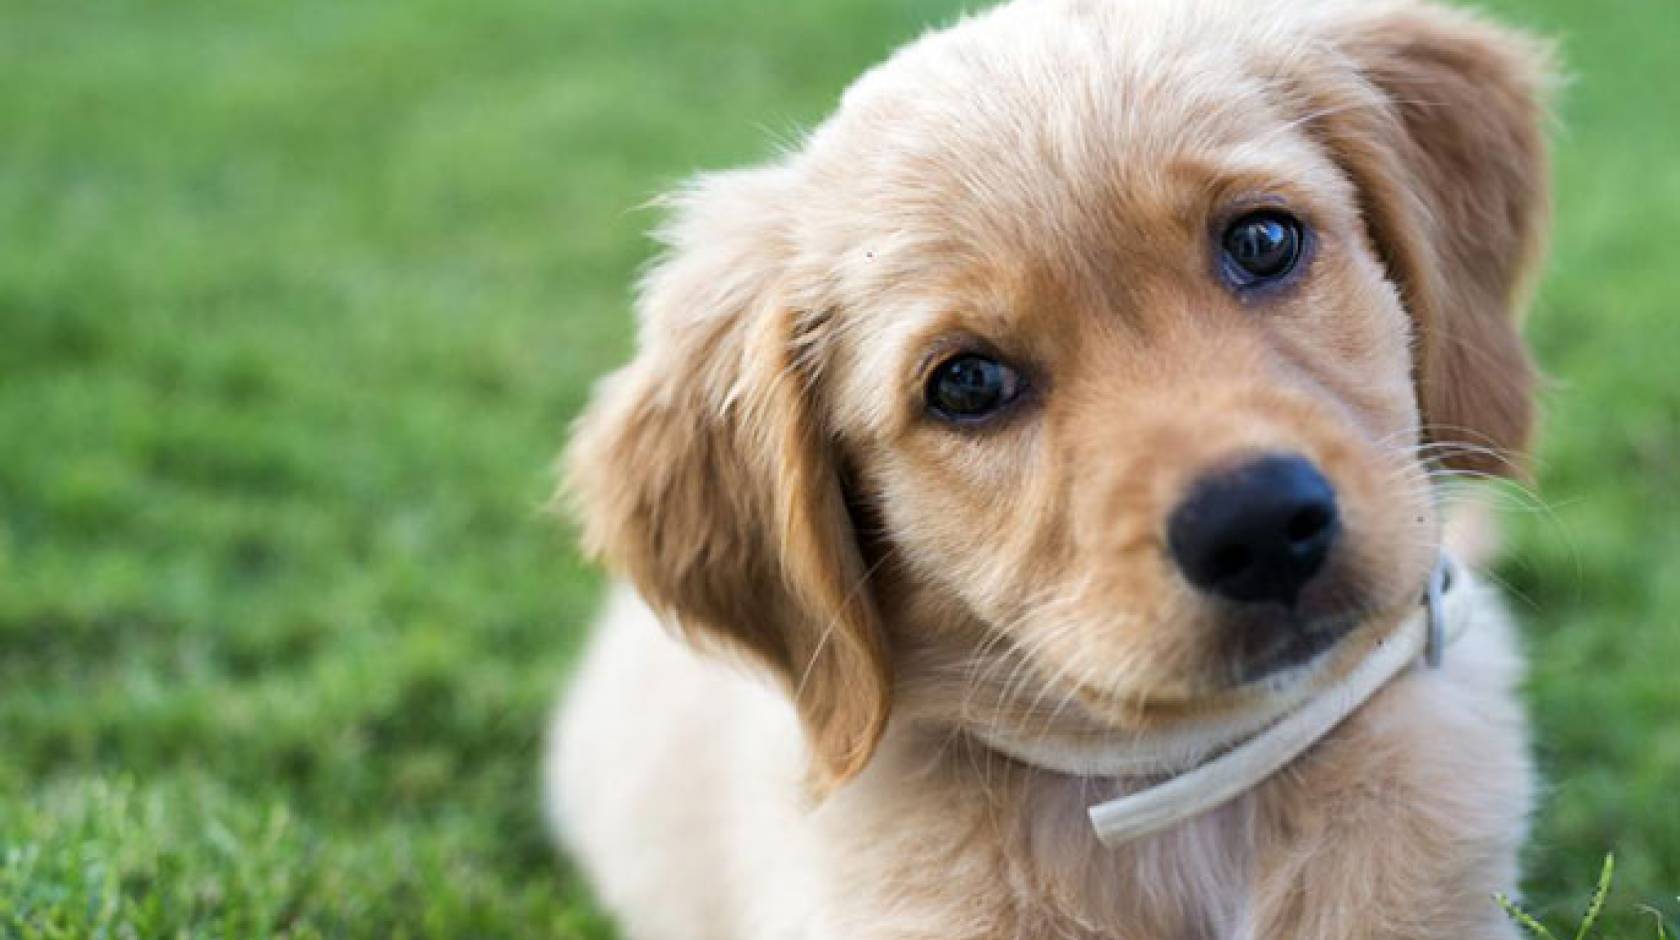 When you should neuter your puppy, according to science ...